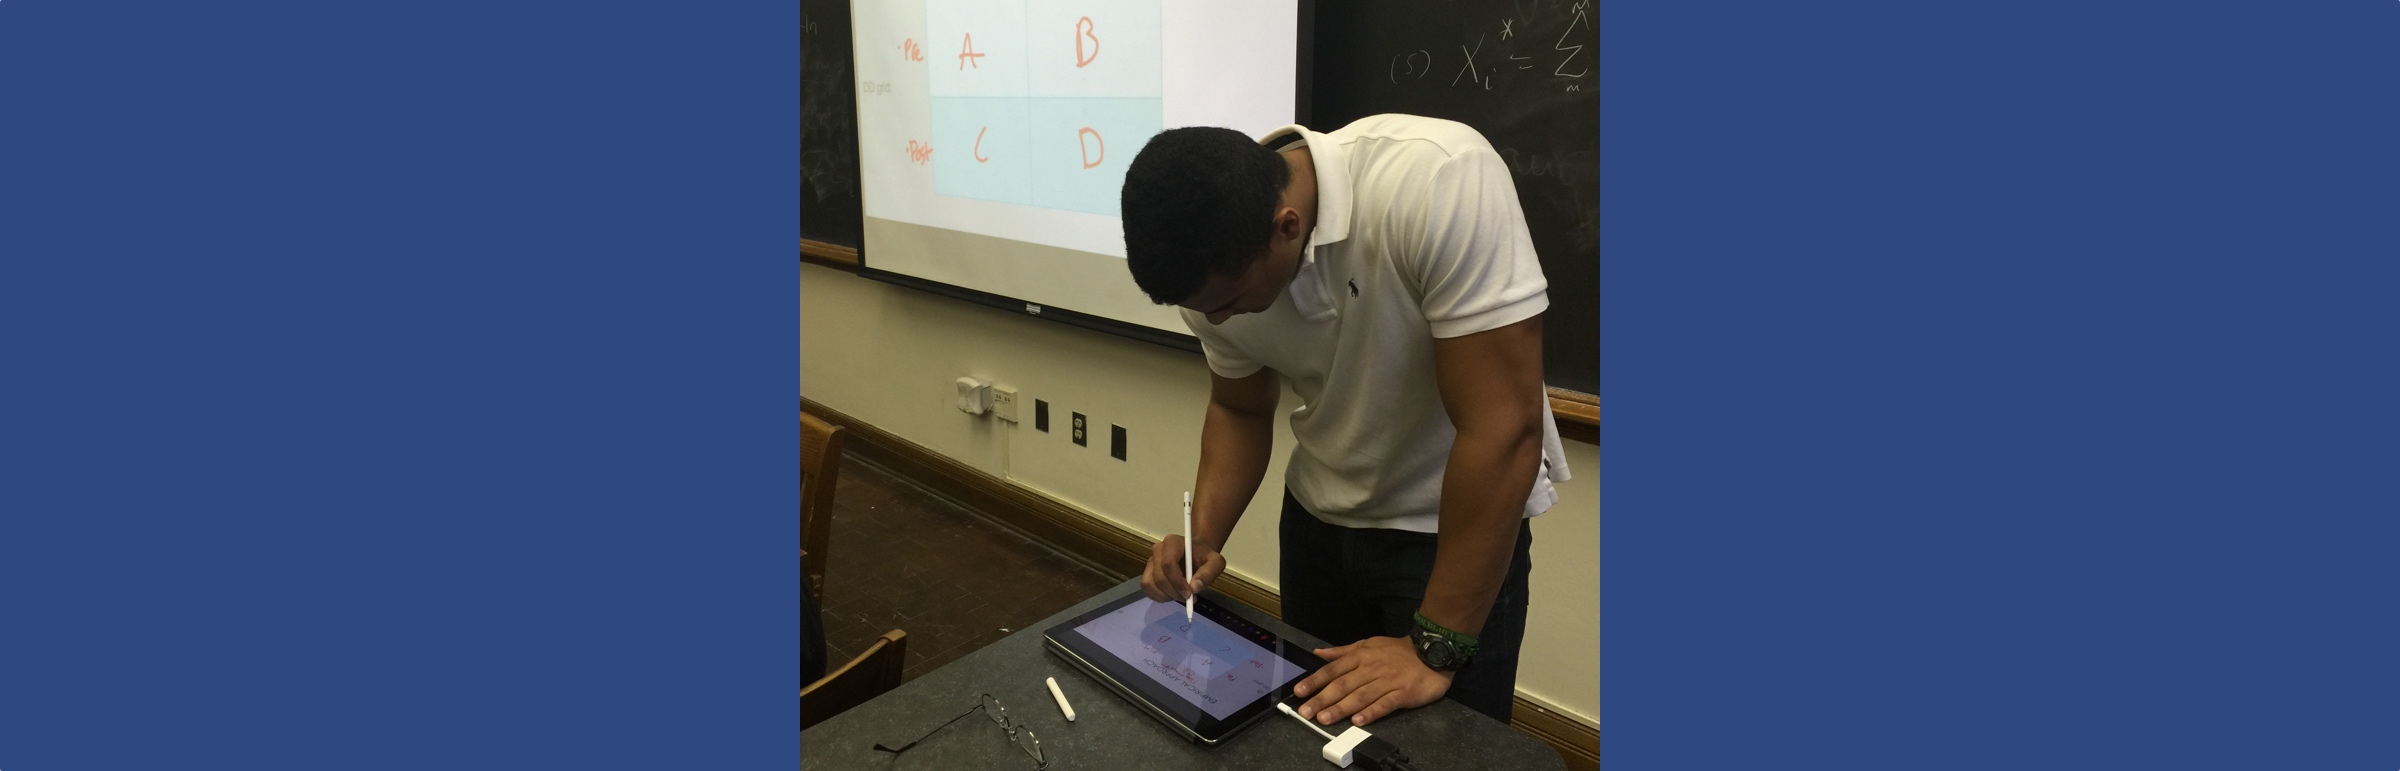 Lecturing with an iPad Pro
                               